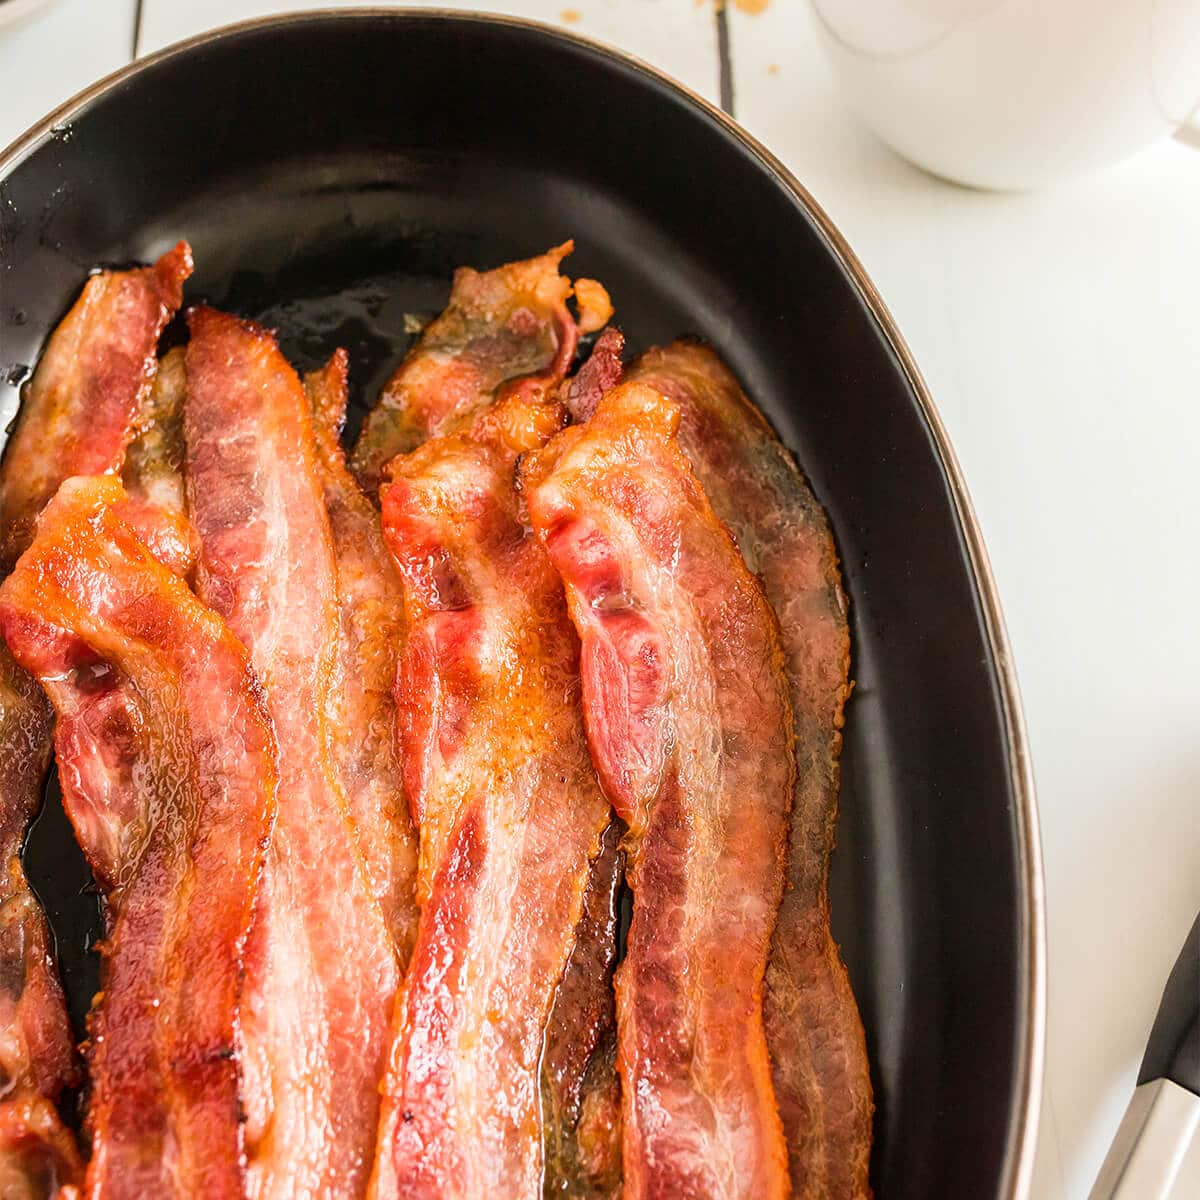 A platter of oven baked bacon.